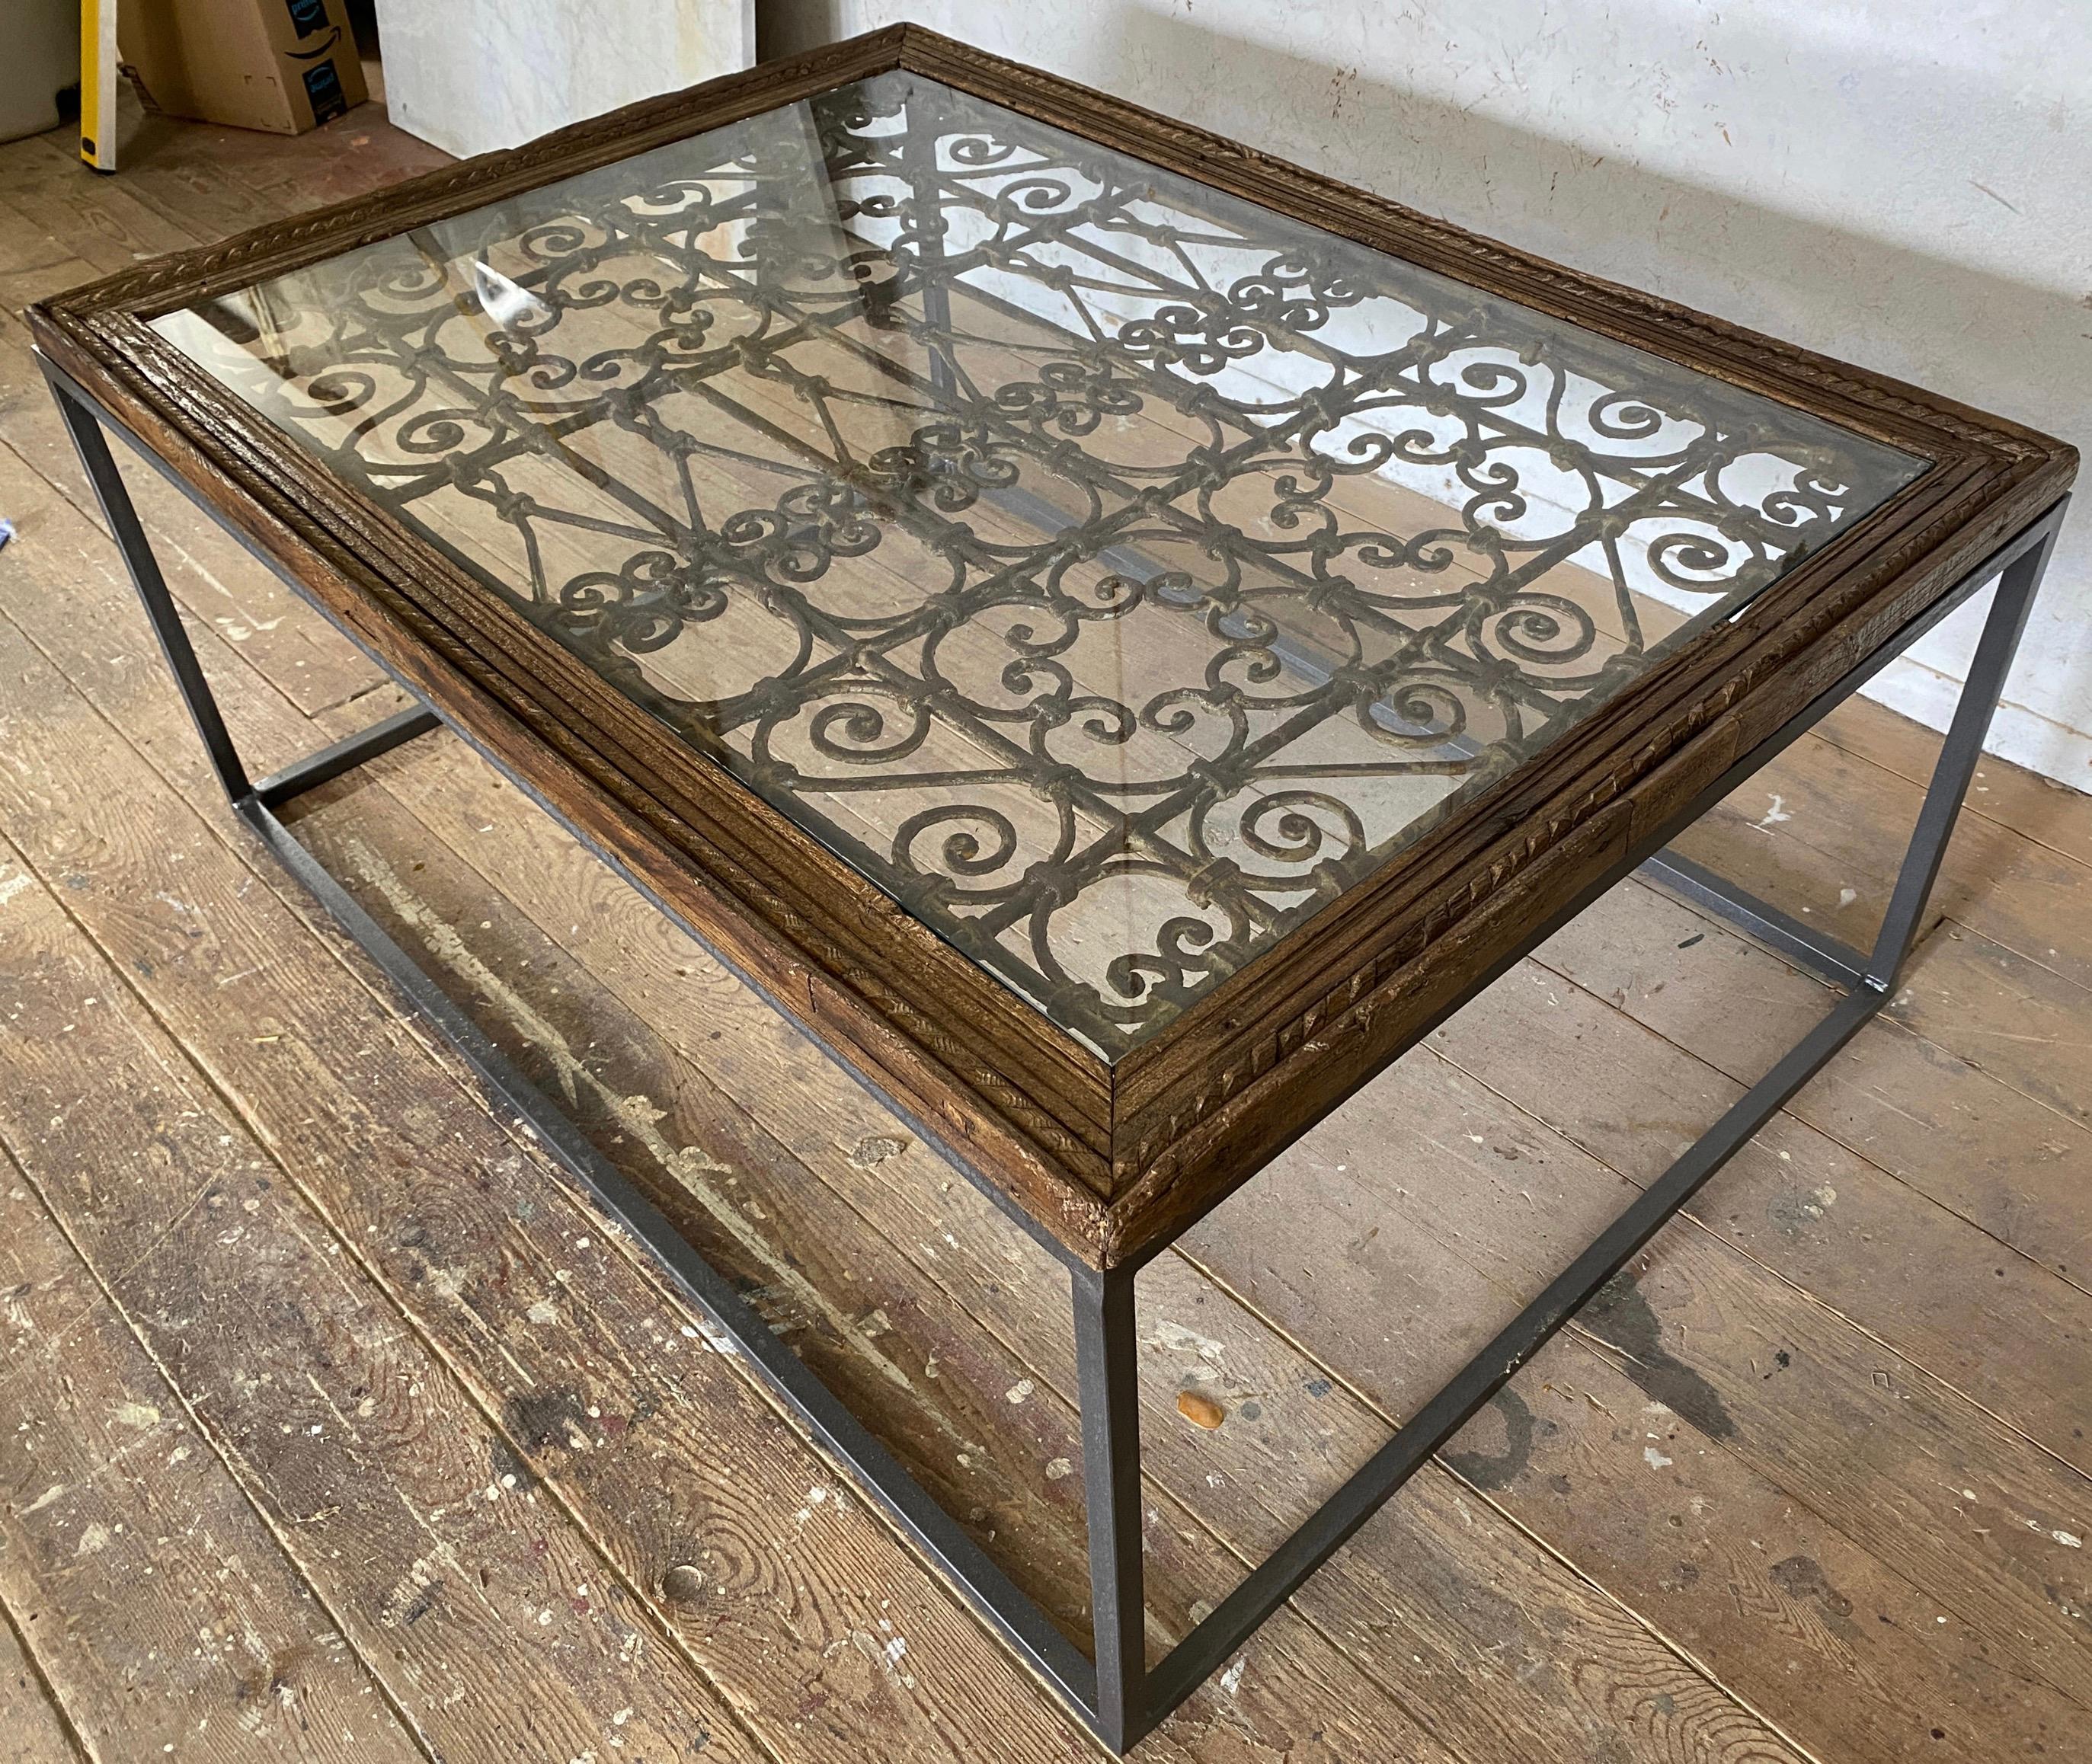 19th Century Antique Indian Iron Window Grate Coffee Table For Sale